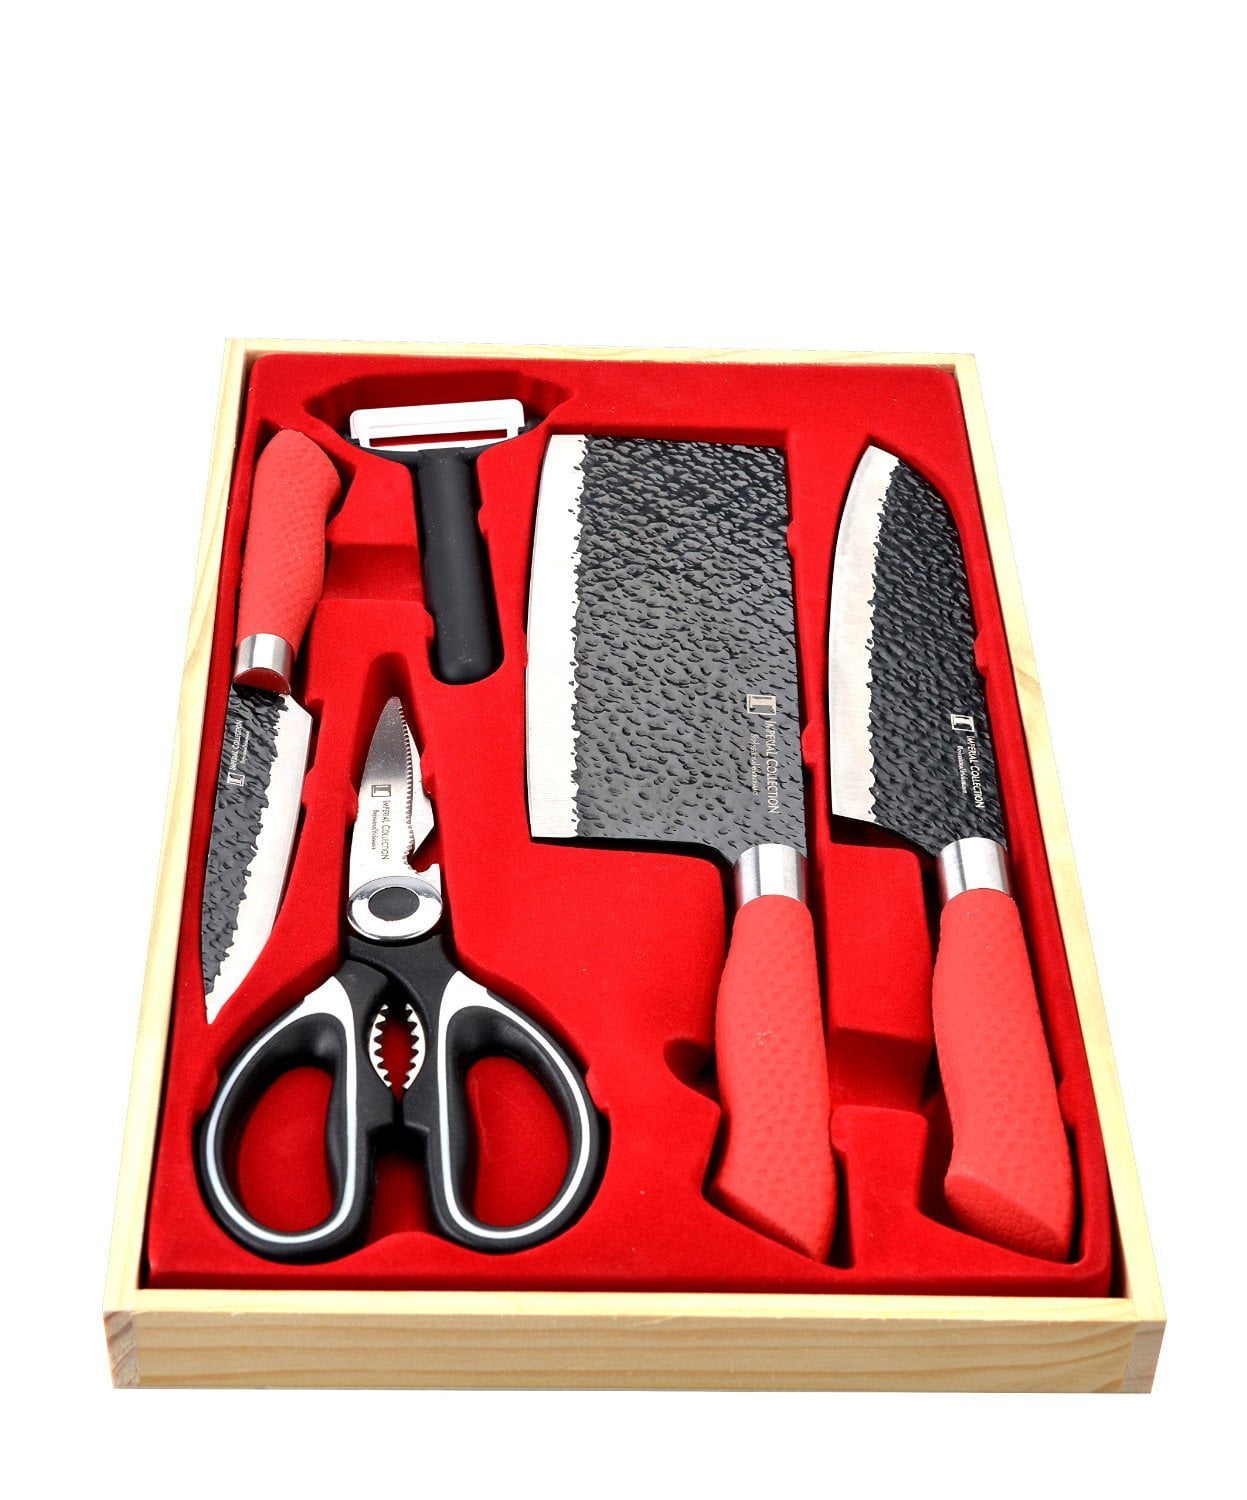 Imperial Collection 6 Piece Knife Set, Includes 2 In 1 ...